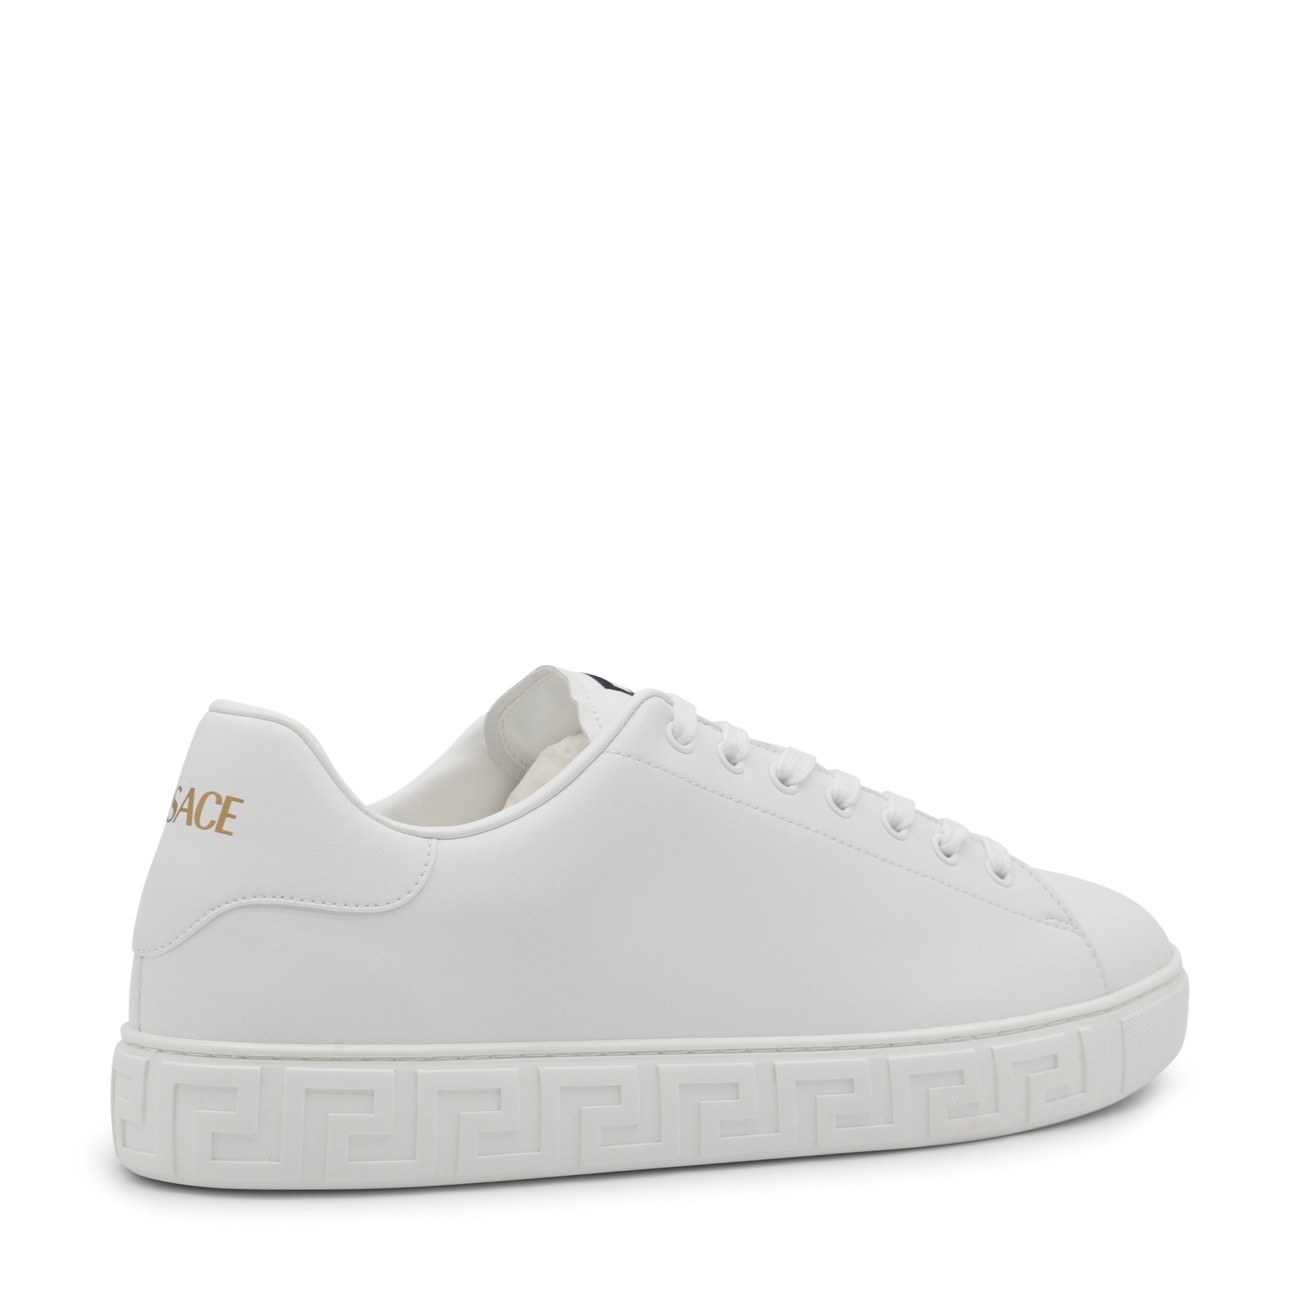 white leather sneakers - 3